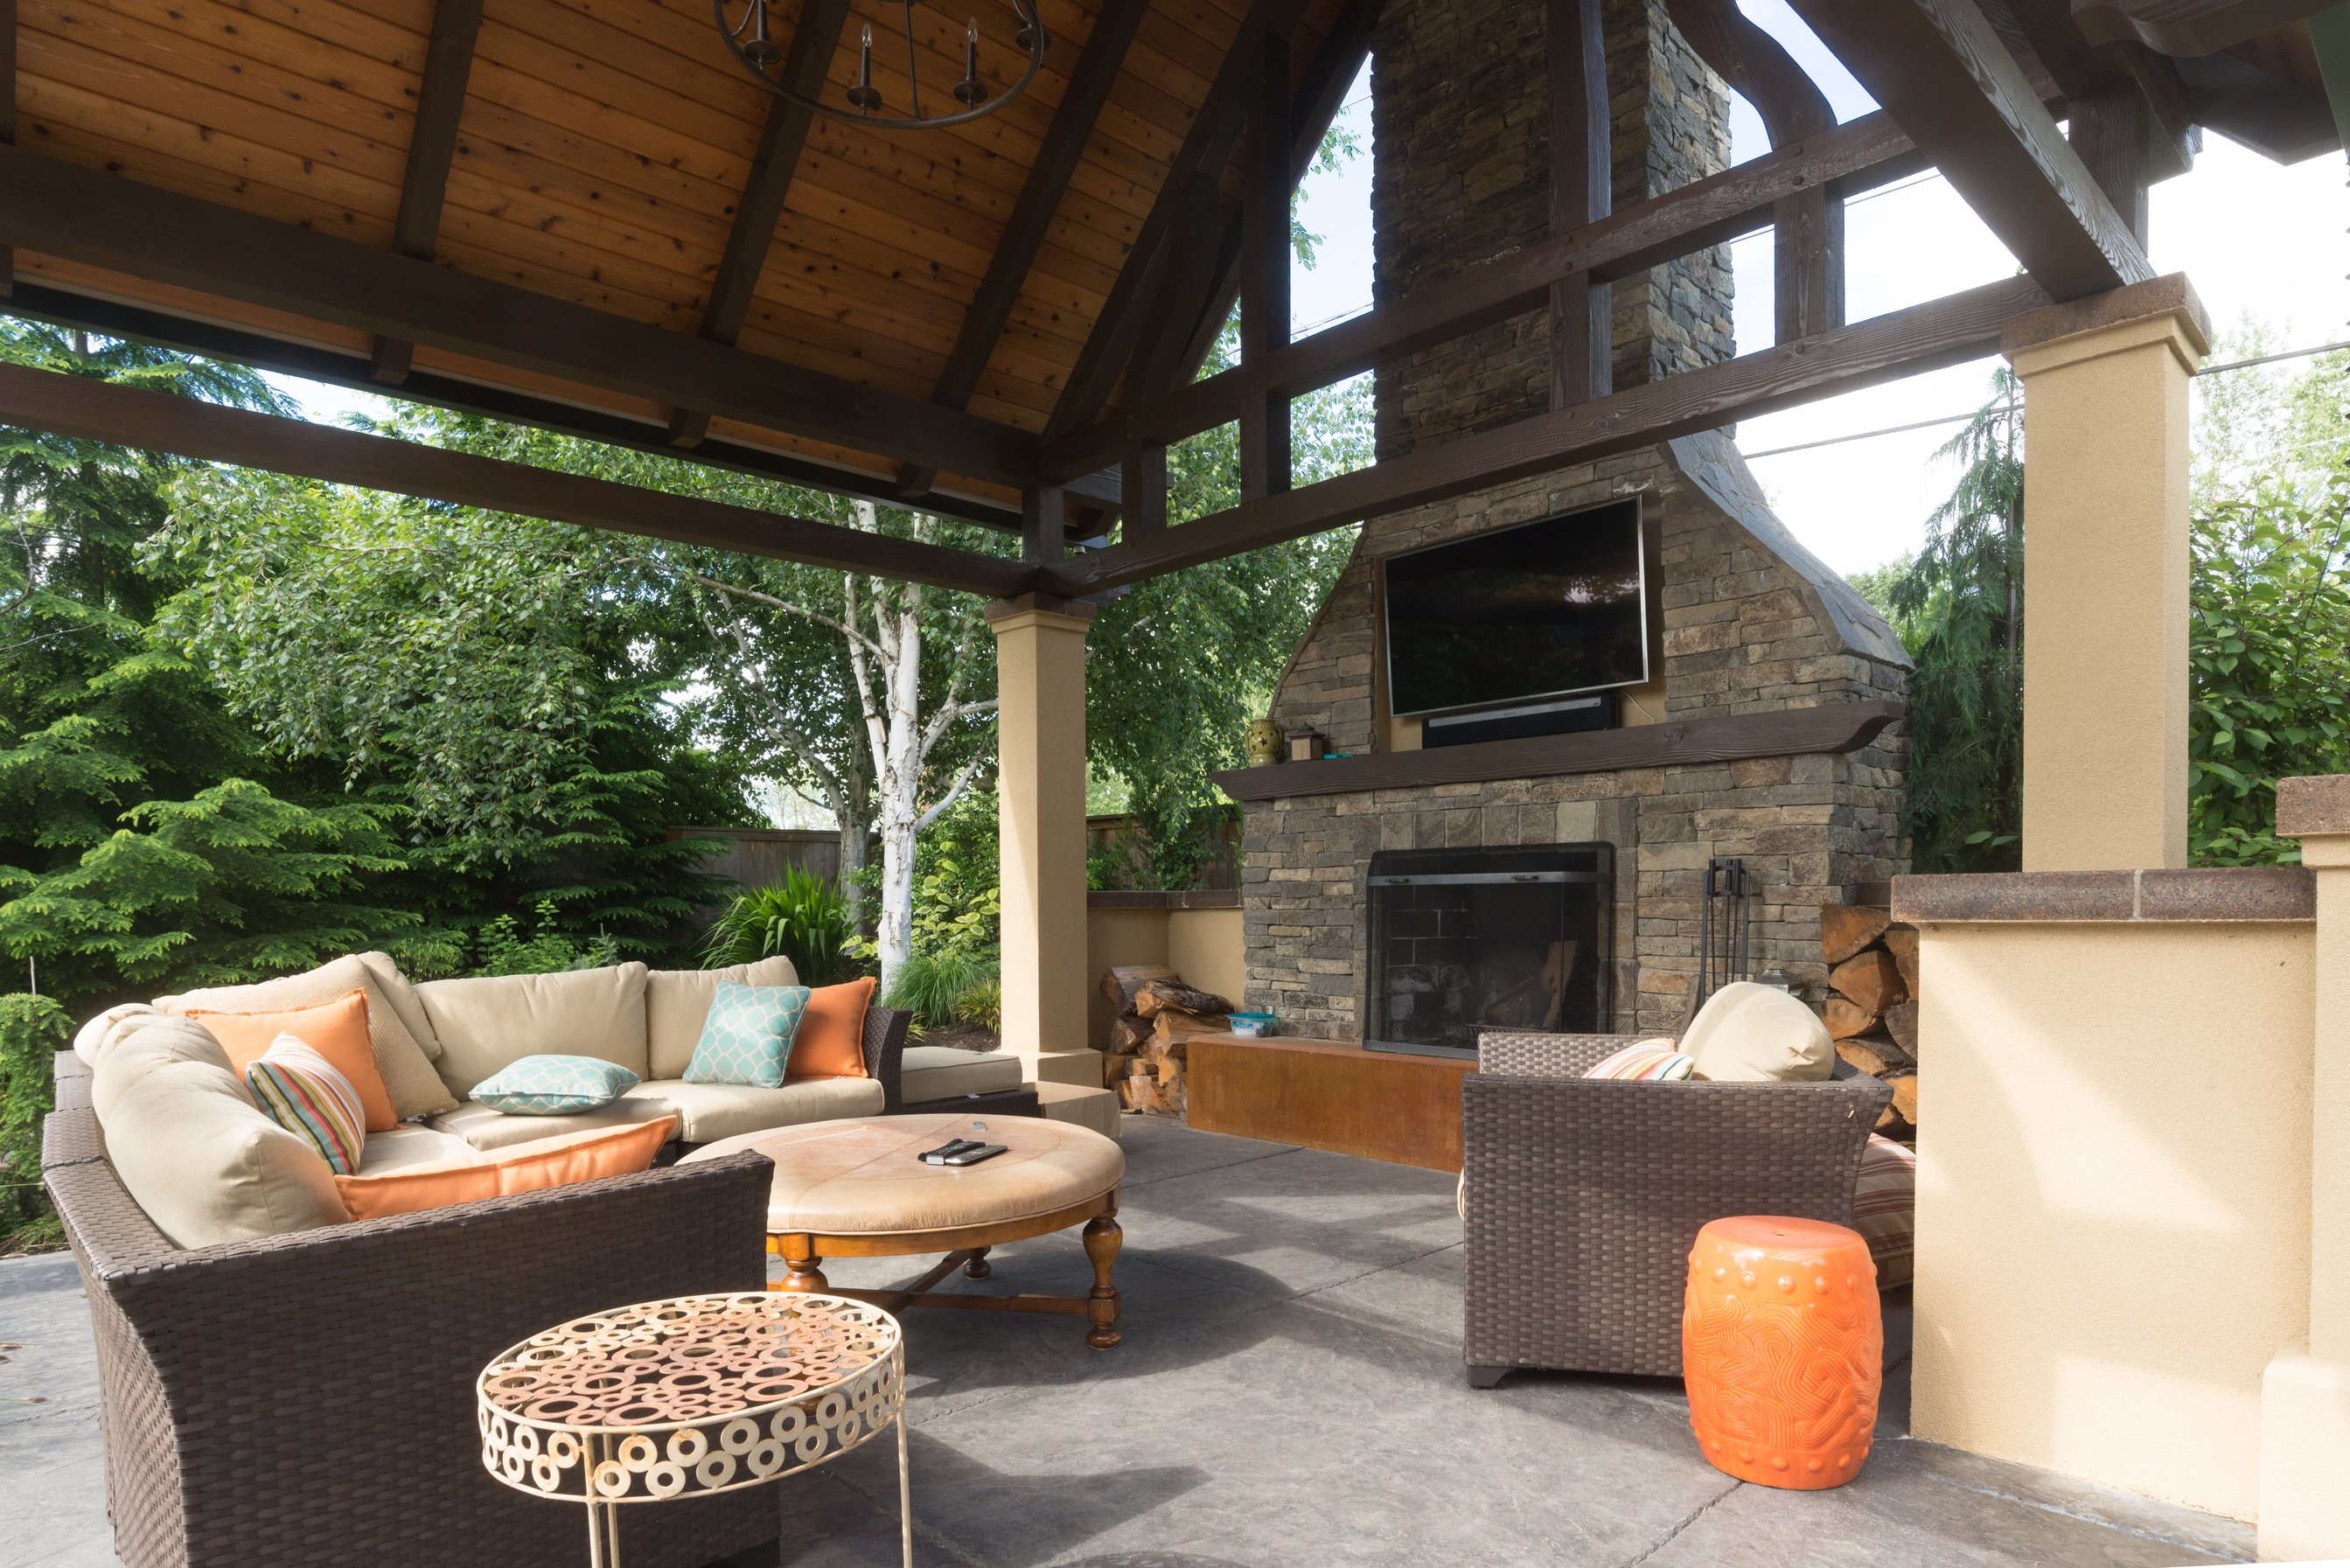 Outdoor Living Space Entertainment Options ?width=2687&name=outdoor Living Space Entertainment Options 